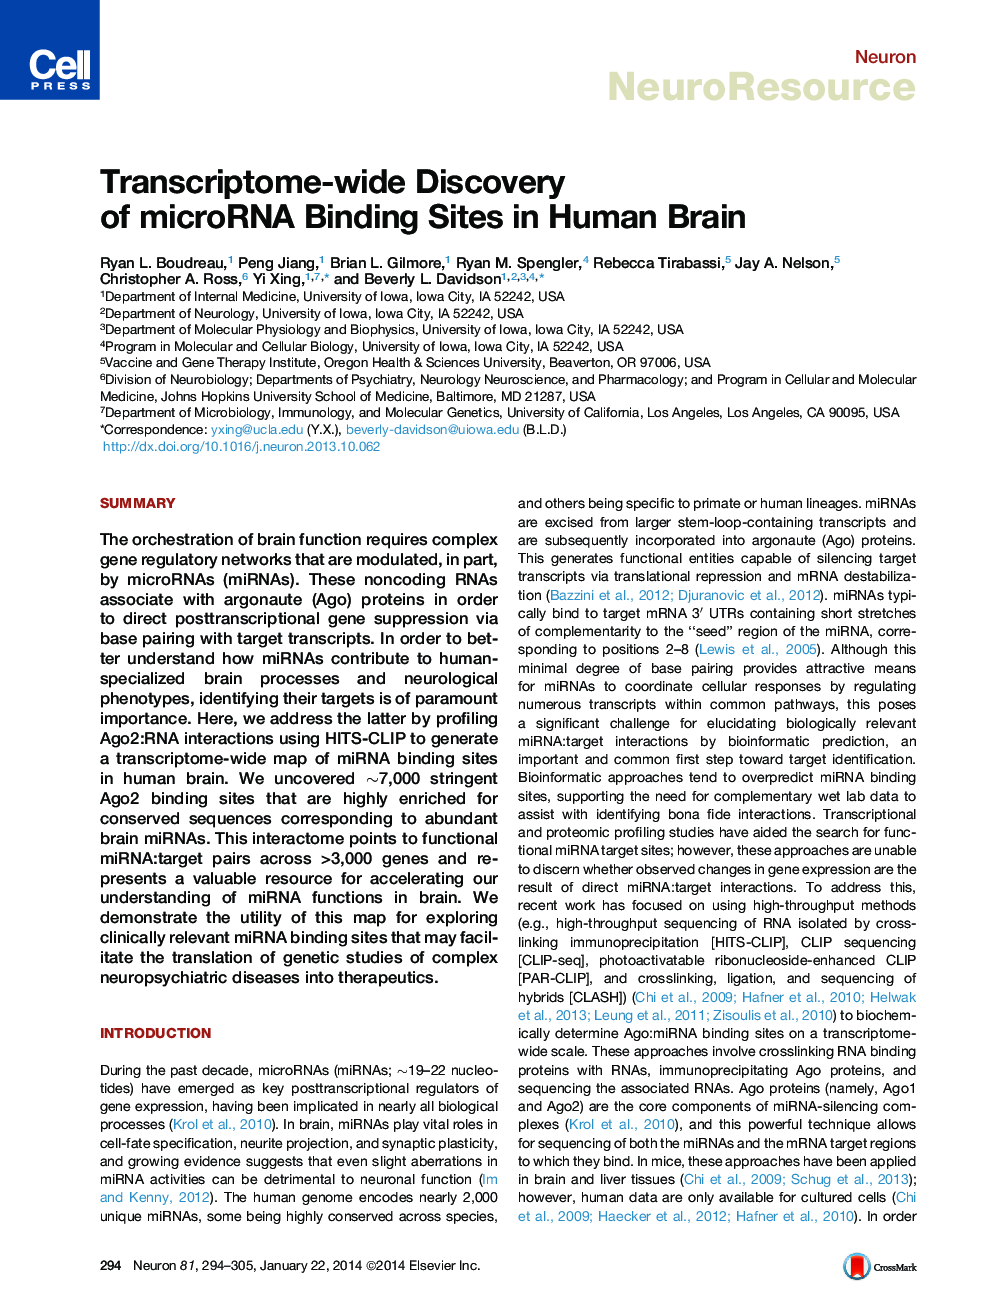 Transcriptome-wide Discovery of microRNA Binding Sites in Human Brain